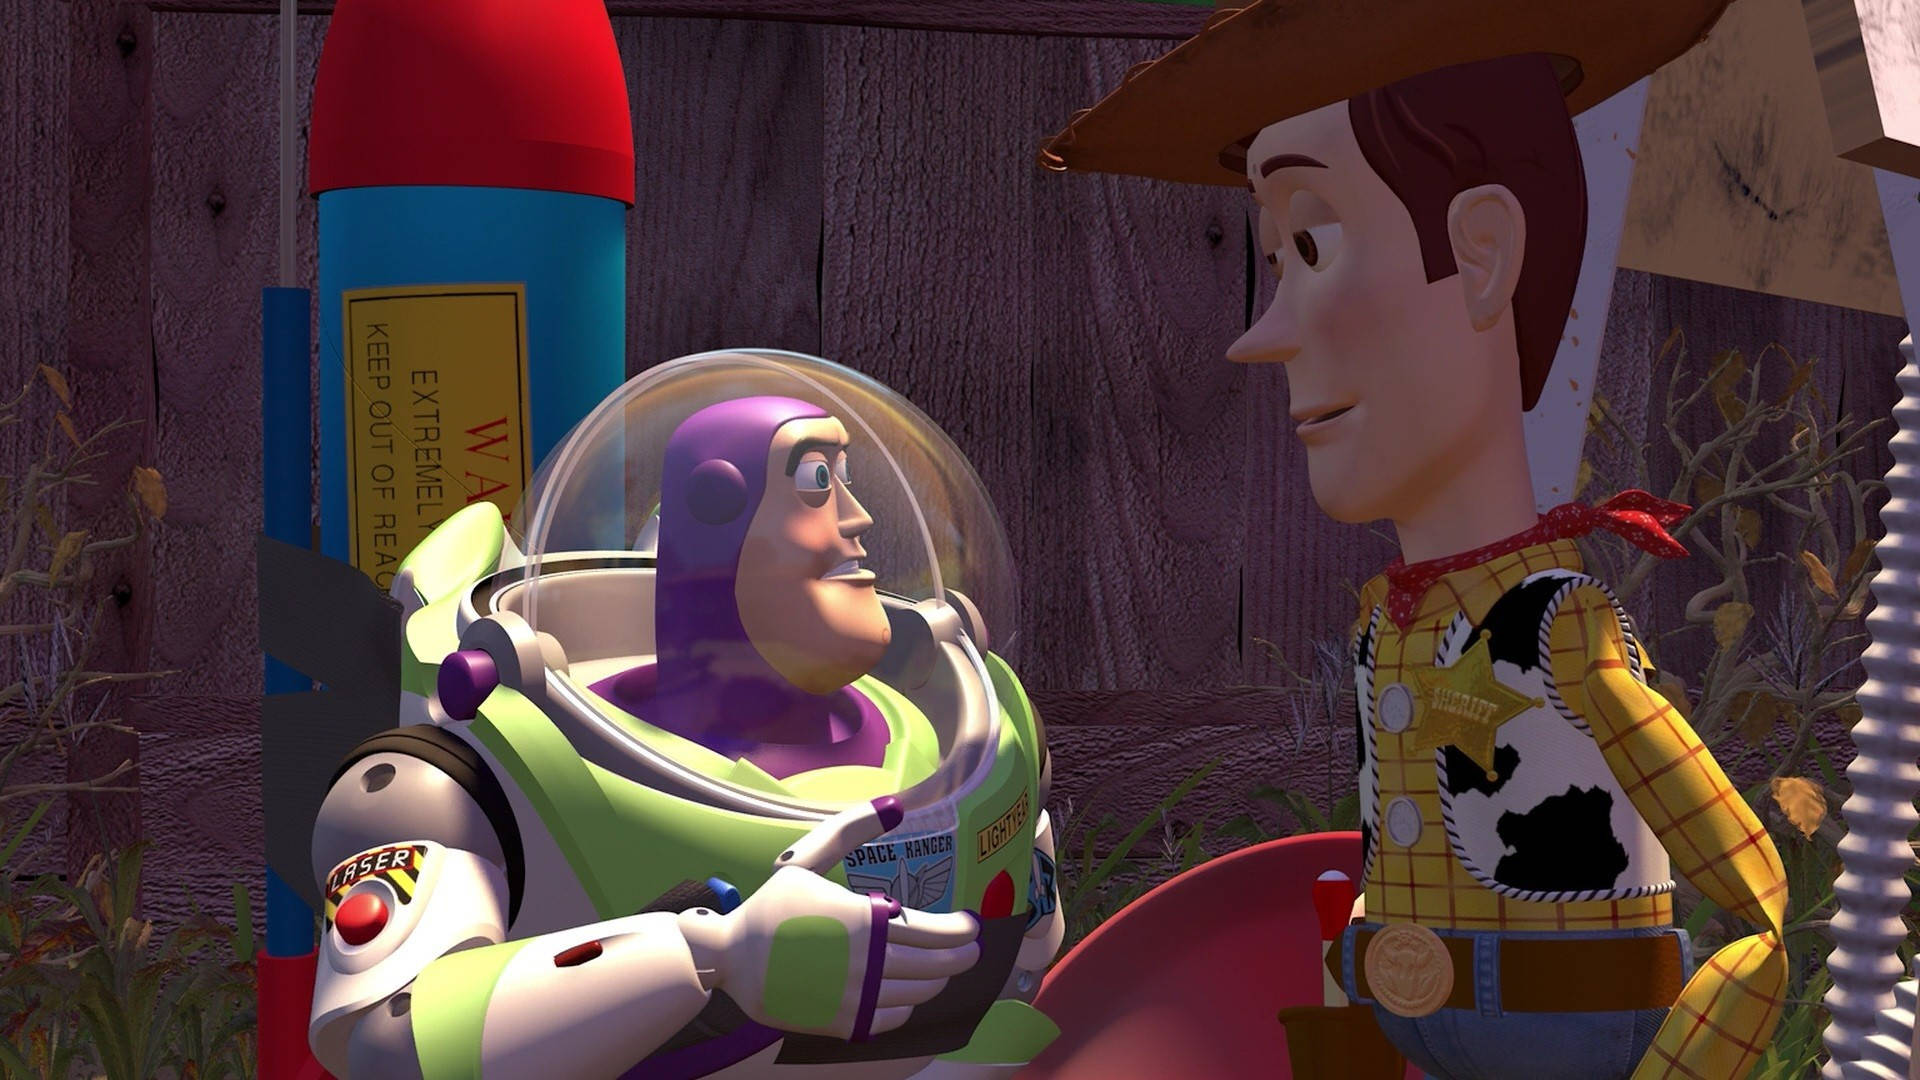 Woody And Buzz Talking Wallpaper